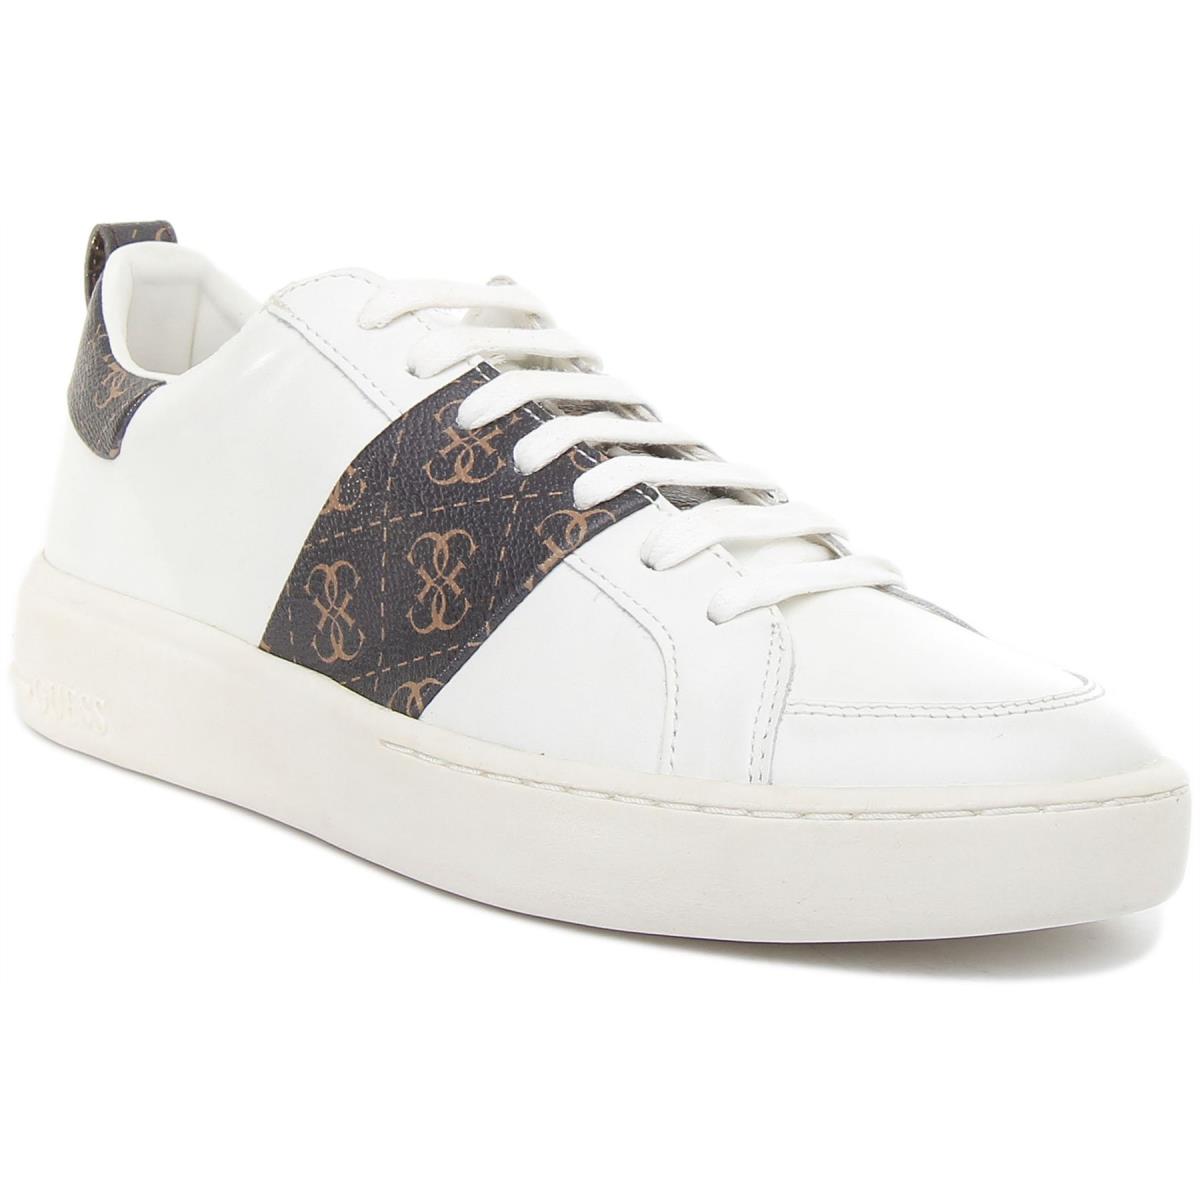 Guess Men Verona Leather Low Sneakers In White Brown Colour US 7 - 13 WHITE BROWN